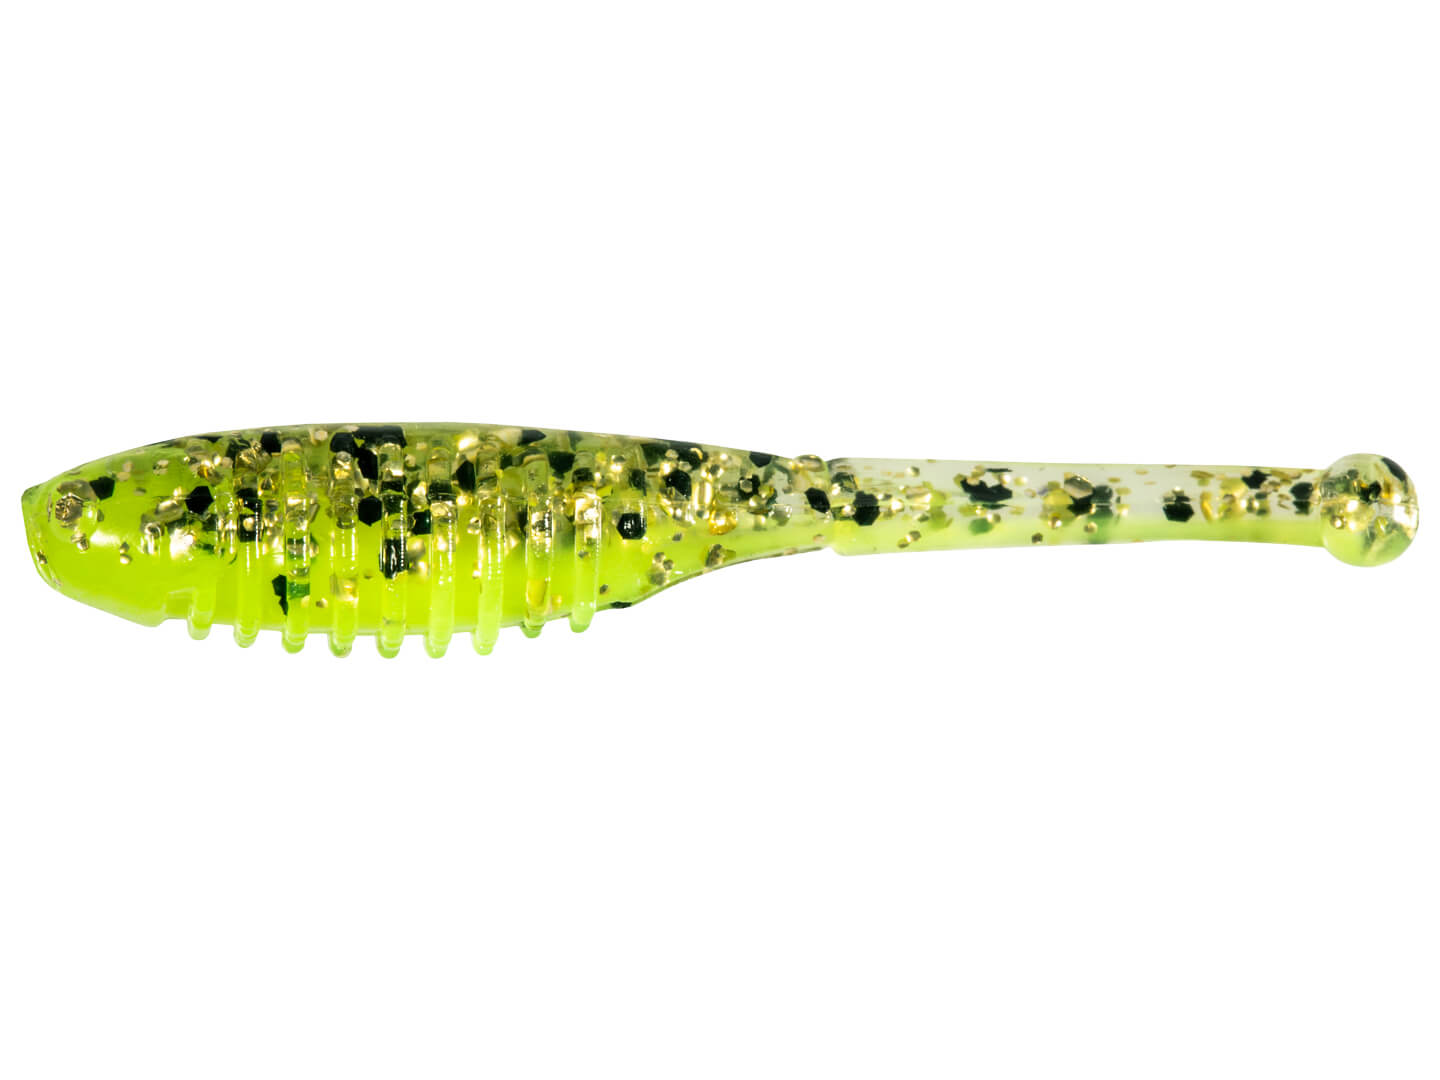 Z-Man Micro Finesse Baby BallerZ – Harpeth River Outfitters